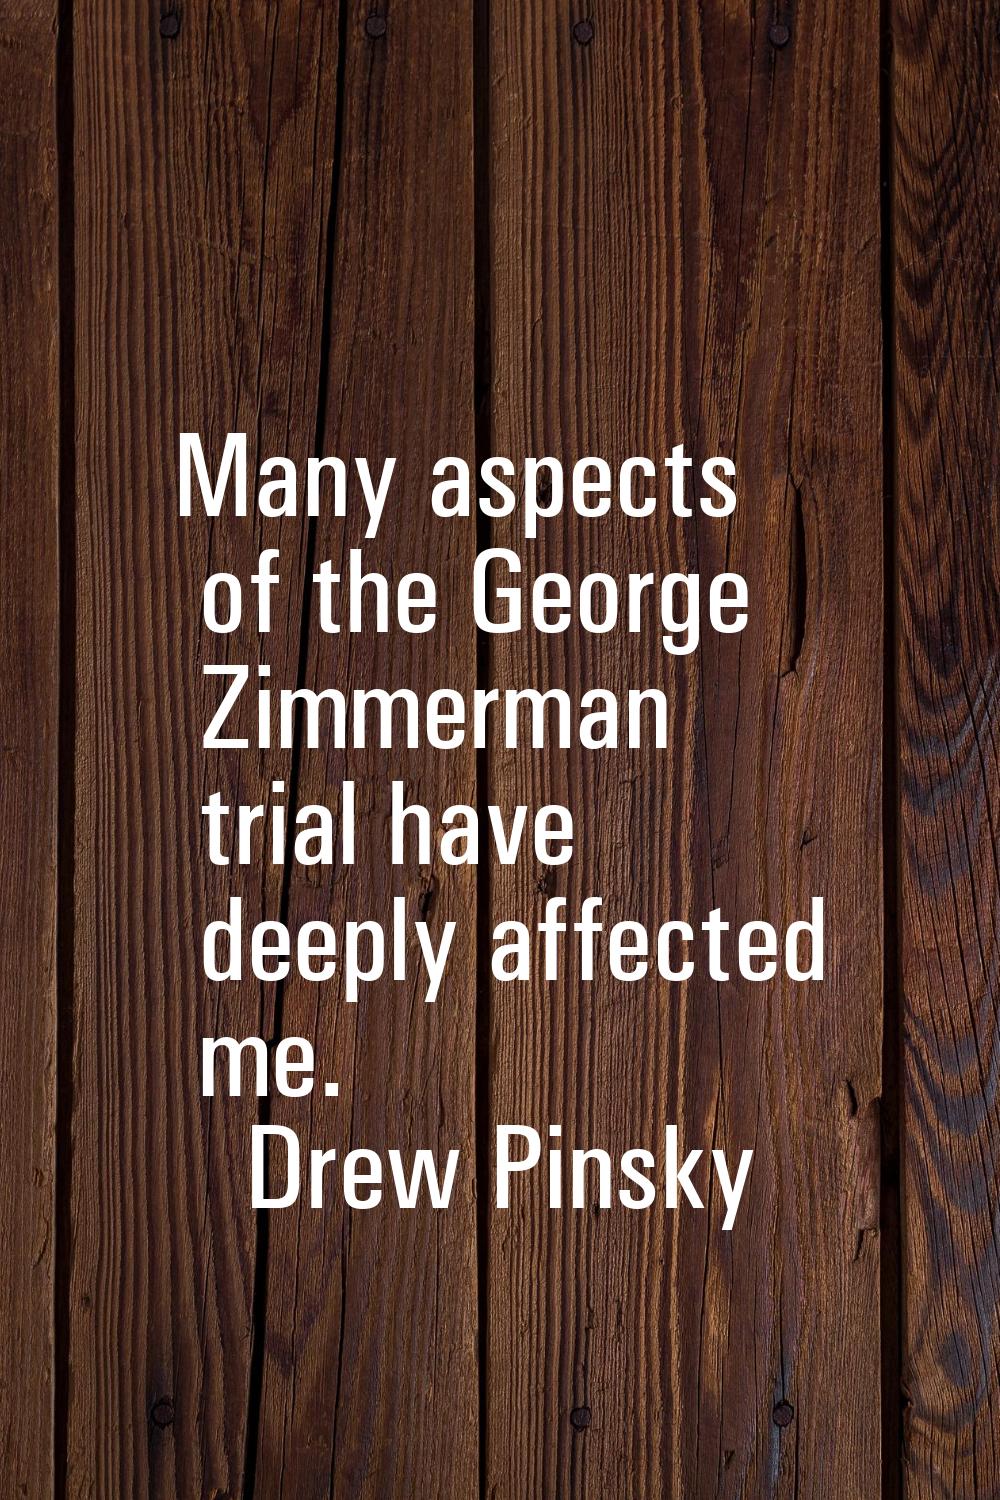 Many aspects of the George Zimmerman trial have deeply affected me.